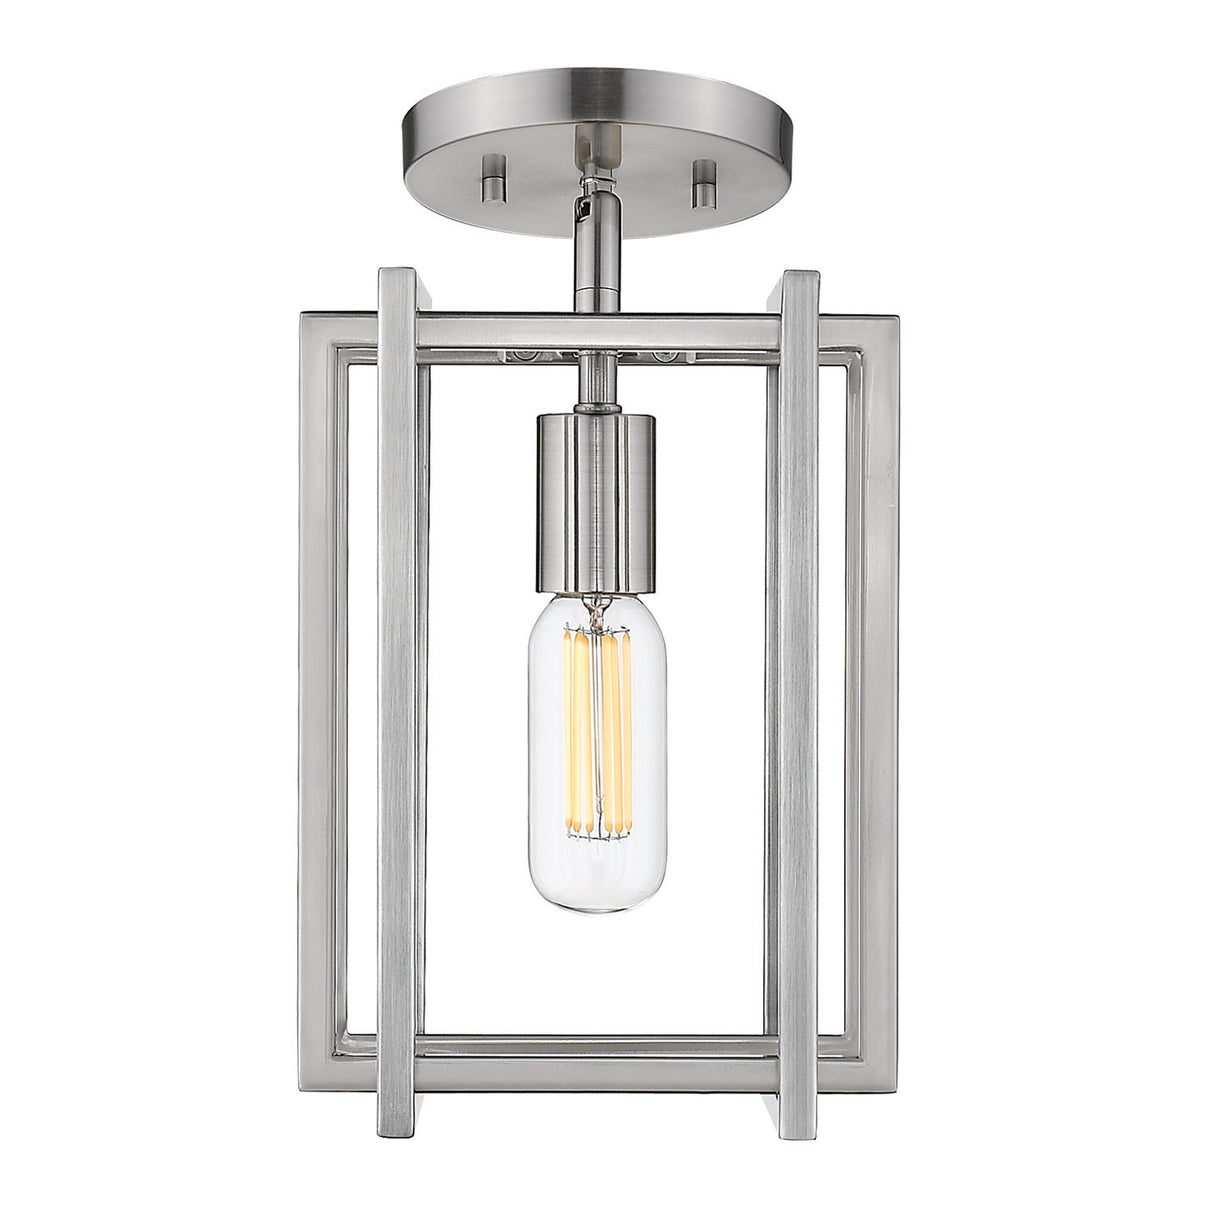 Tribeca 1-Light Semi-Flush in Pewter with Pewter Accents